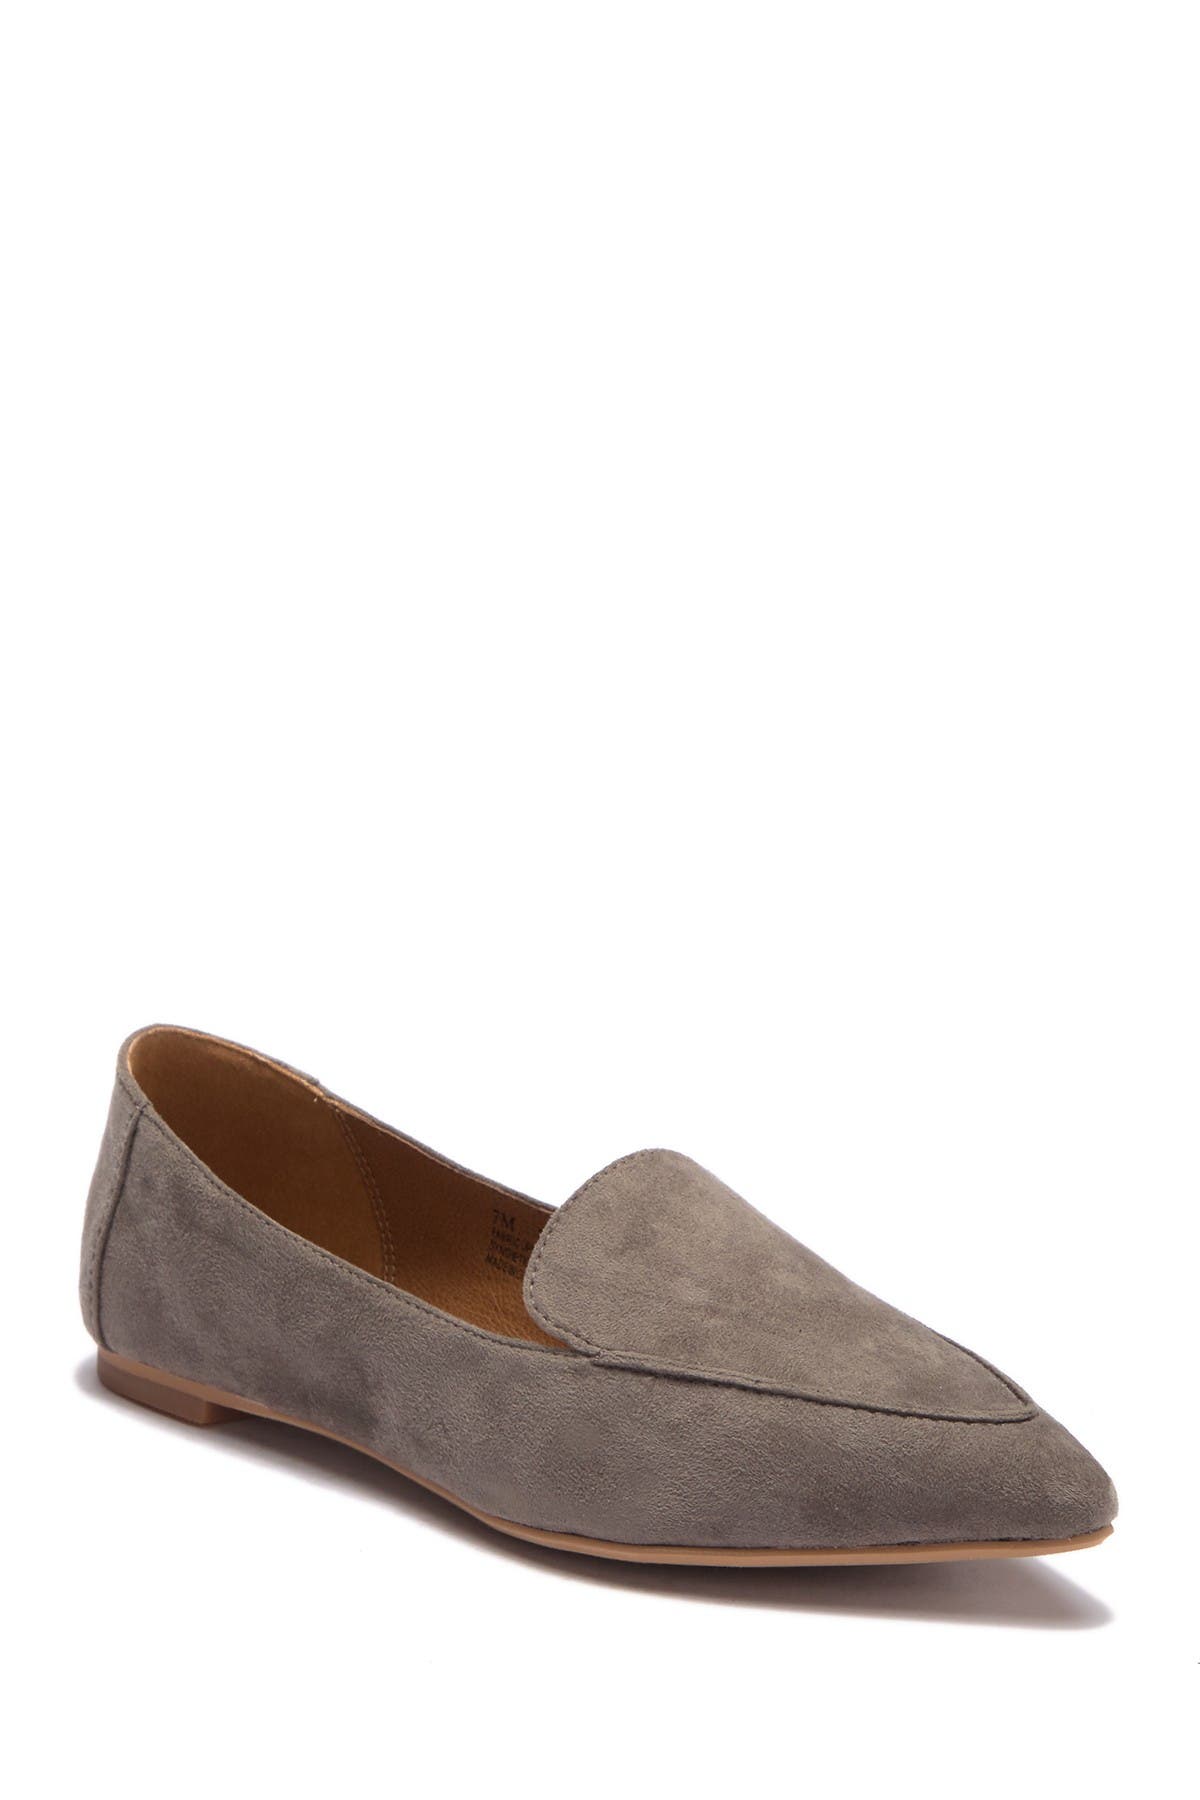 Abound | Kali Pointed Toe Flat - Wide 